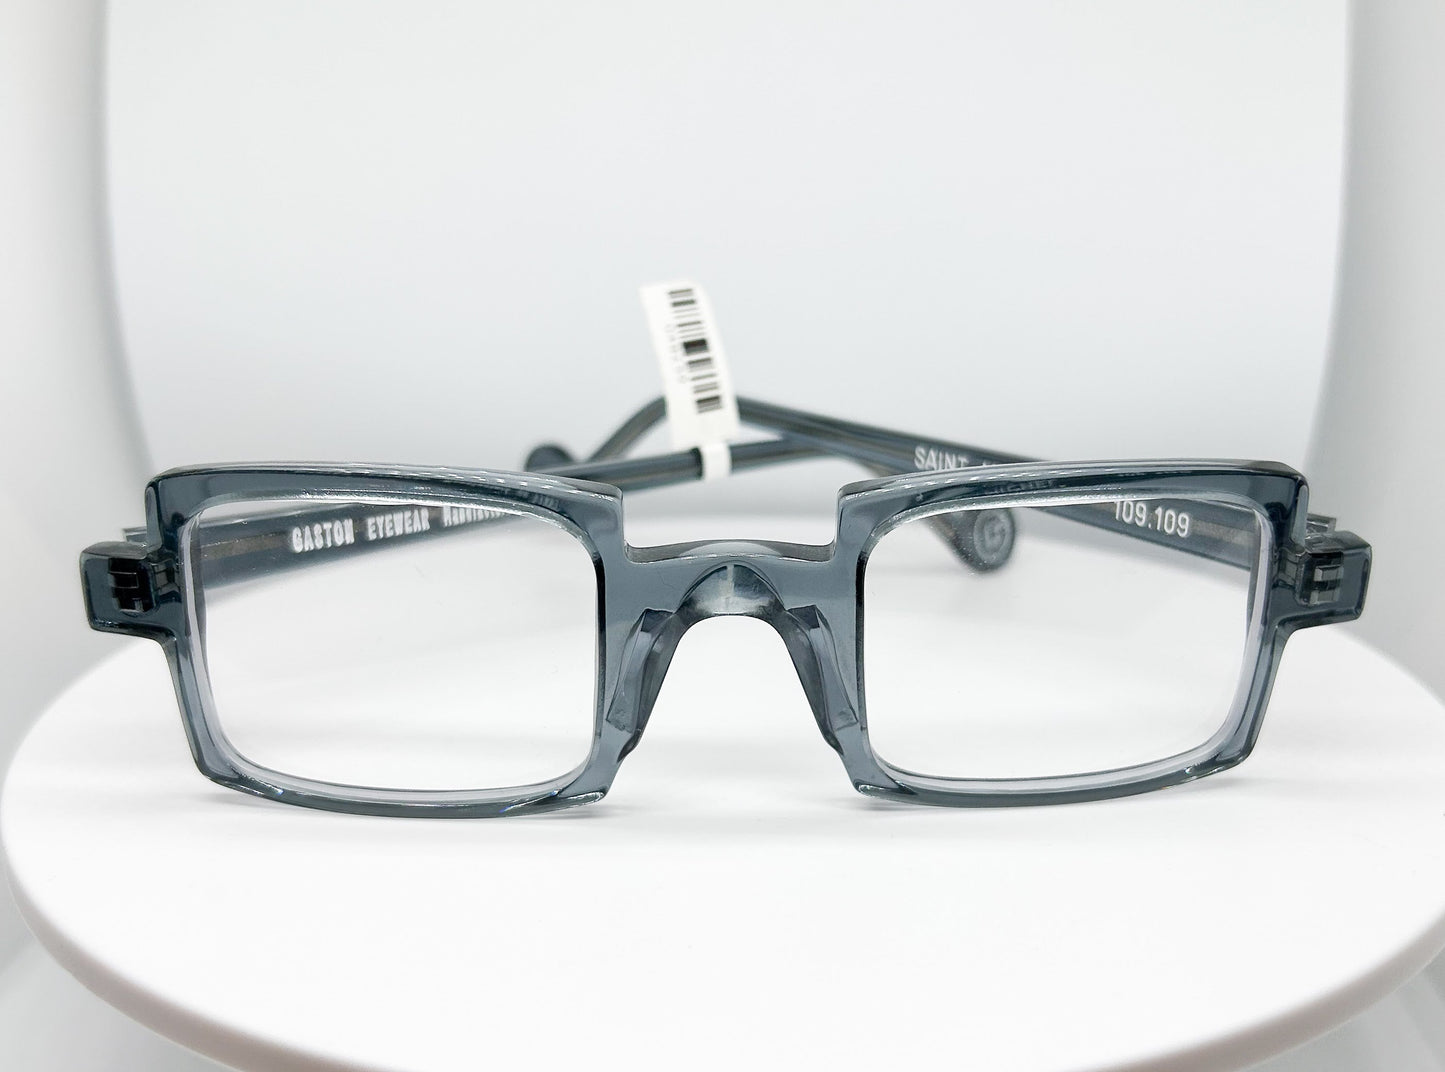 Buy Gaston Eyewear - Saint Michel, a  Transparent gray; Acetate Optical Frame with a Square shape. An Authorized Dealer, Adair Eyewear has a 40+ Years History of Customer Service Excellence